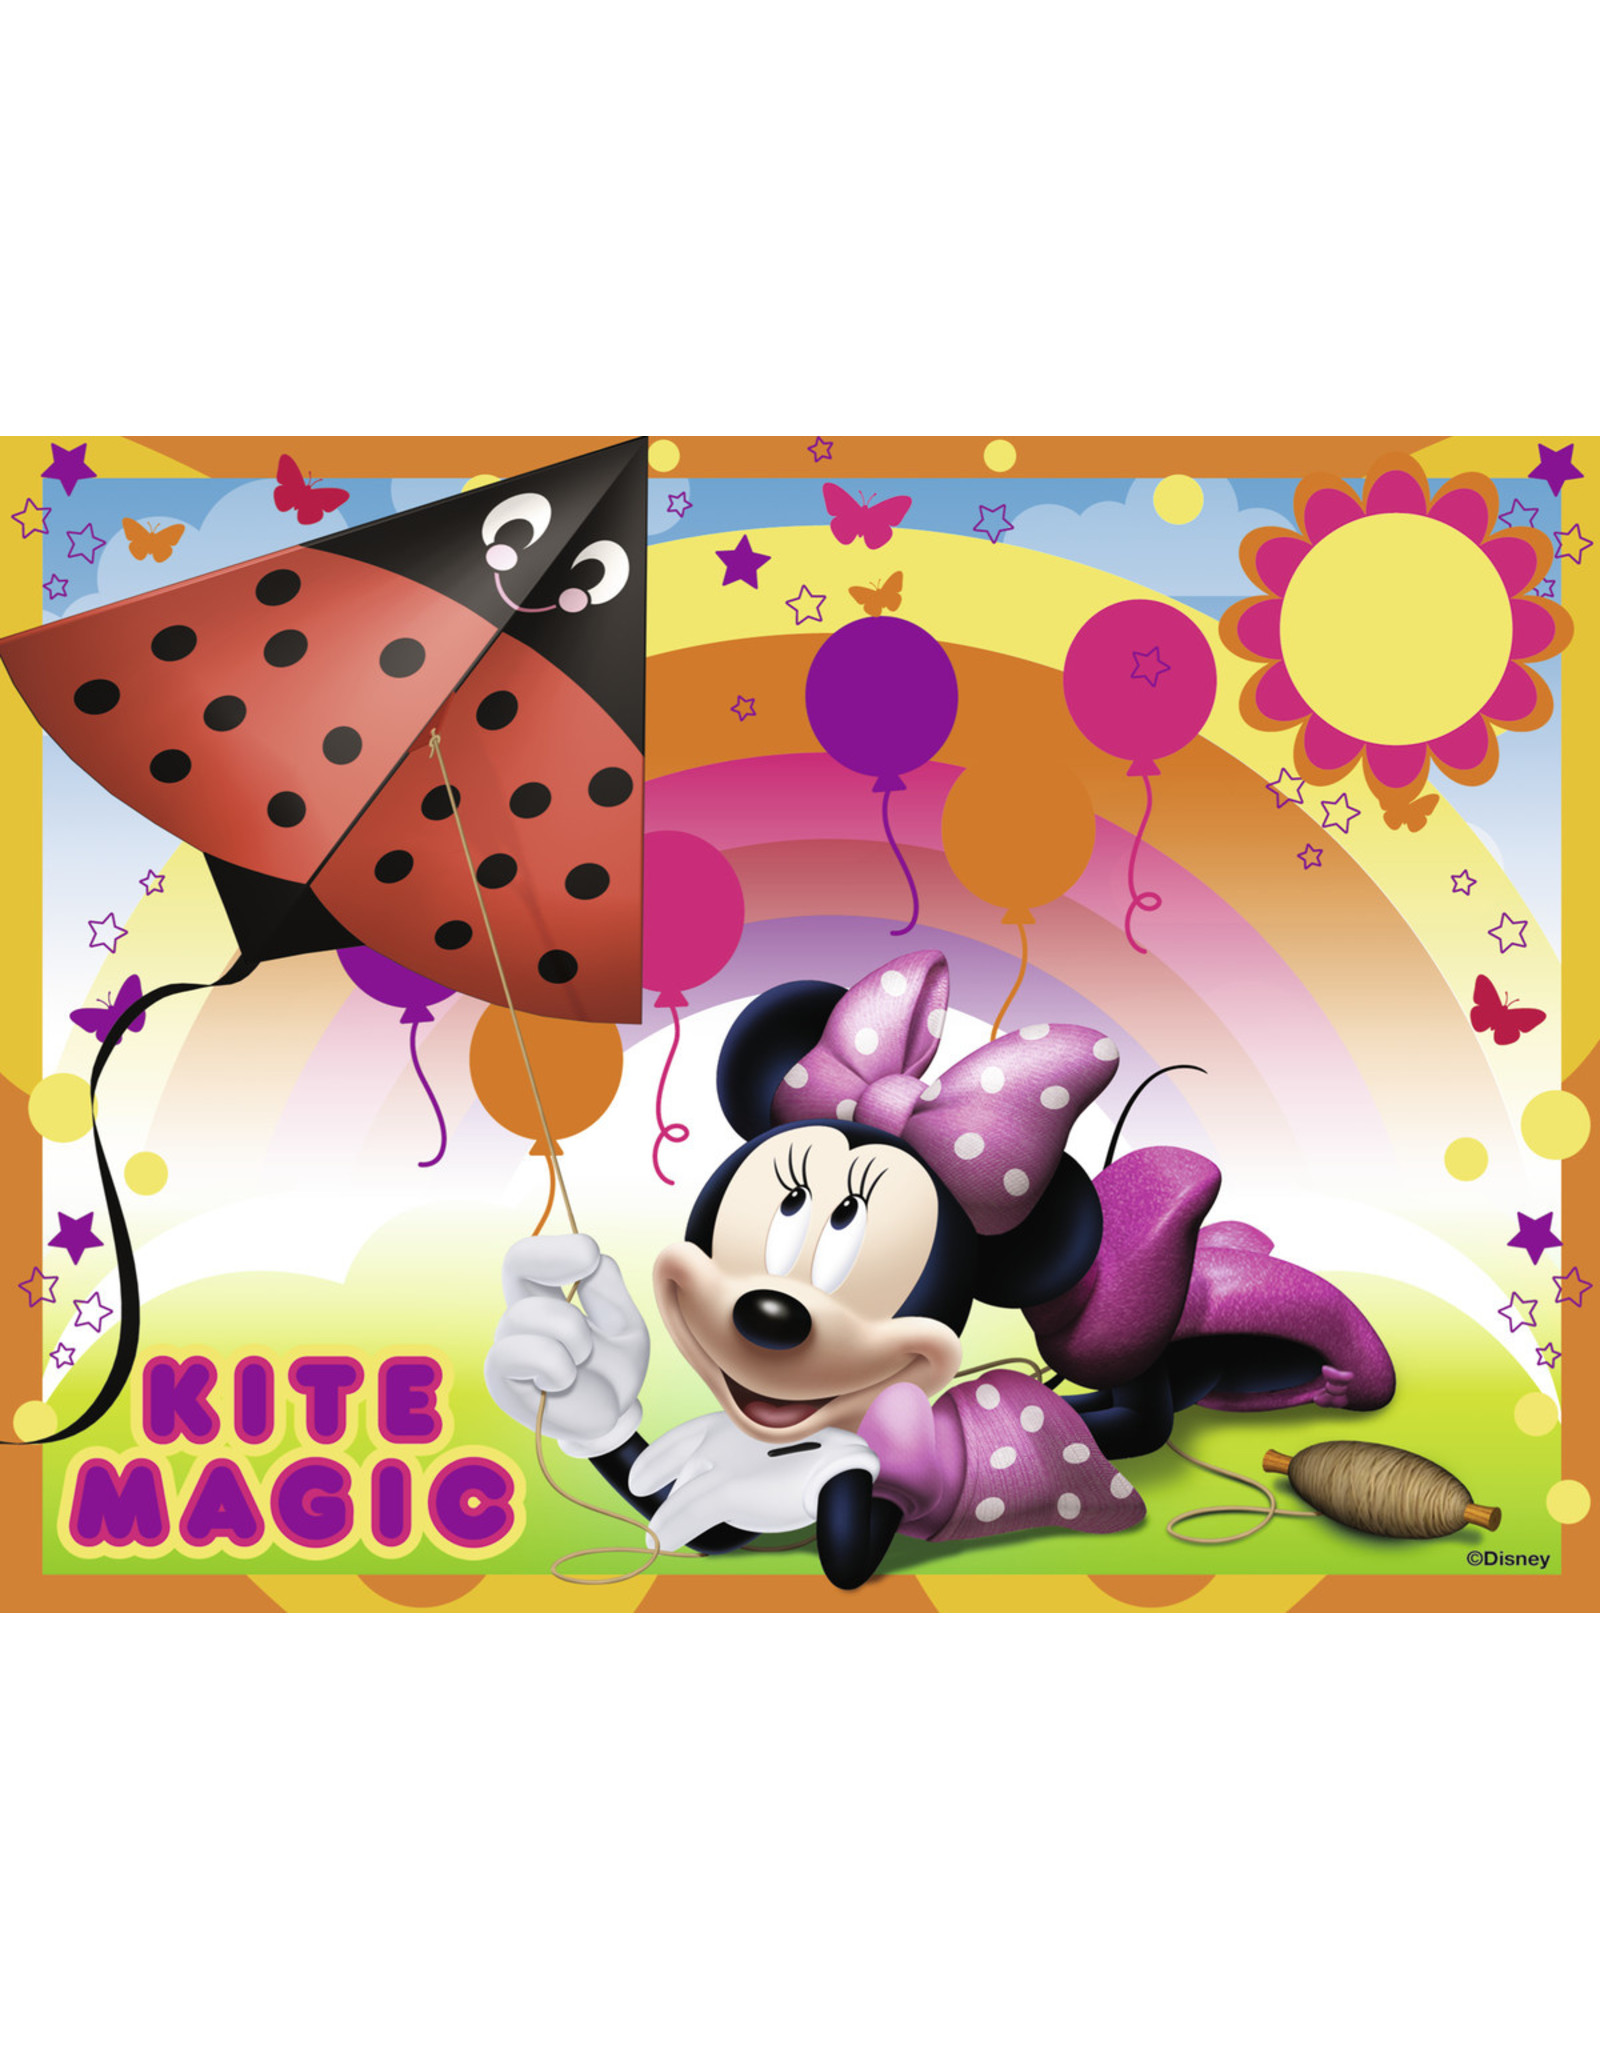 Ravensburger Minnie Mouse 4 In A Box 12+16+20+24